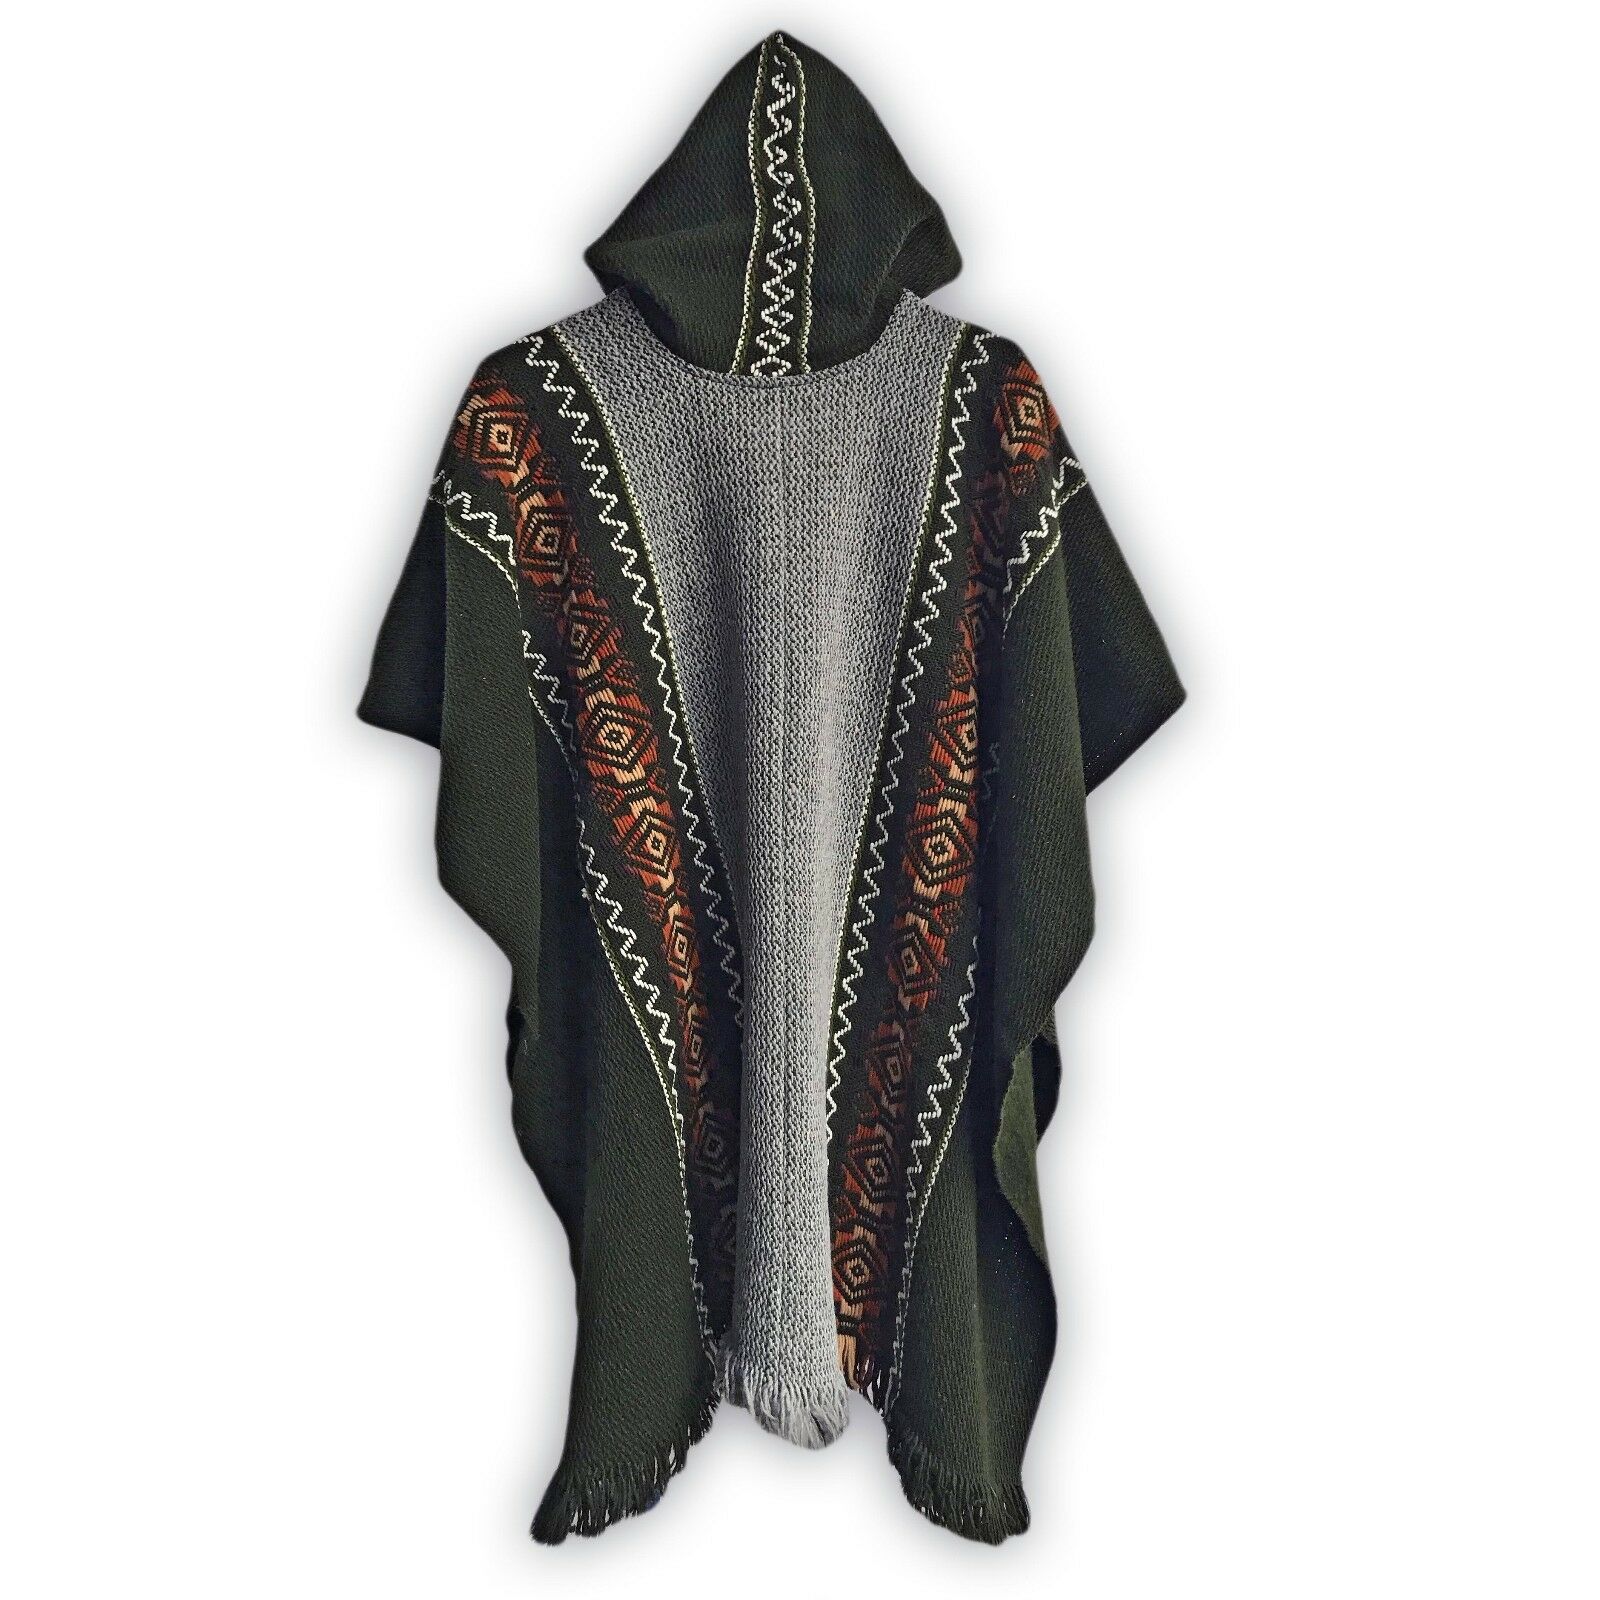 Llama Wool Unisex South American Handwoven Hooded Poncho - solid olive green with diamonds pattern